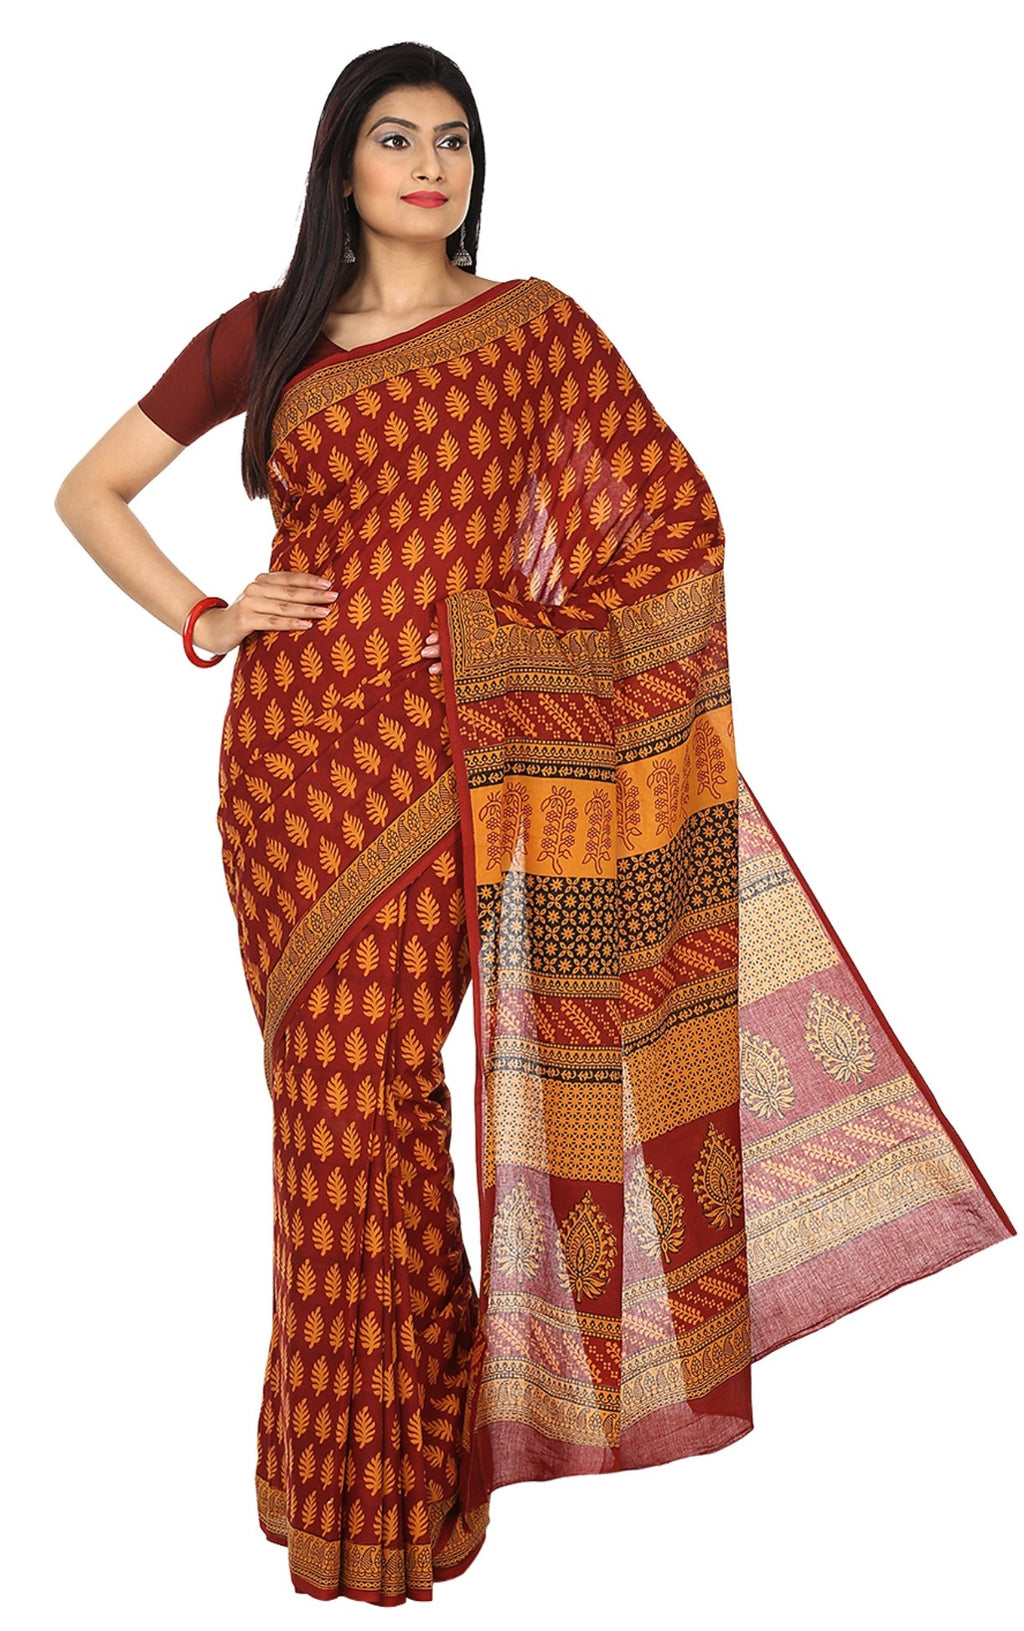 Kalakari India Maroon & Mustard Yellow Hand block Bagh Print Handcrafted Cotton Saree-Saree-Kalakari India-ZIBASA0001-Bagh, Cotton, Geographical Indication, Hand Blocks, Hand Crafted, Heritage Prints, Natural Dyes, Sarees, Sustainable Fabrics-[Linen,Ethnic,wear,Fashionista,Handloom,Handicraft,Indigo,blockprint,block,print,Cotton,Chanderi,Blue, latest,classy,party,bollywood,trendy,summer,style,traditional,formal,elegant,unique,style,hand,block,print, dabu,booti,gift,present,glamorous,affordable,c